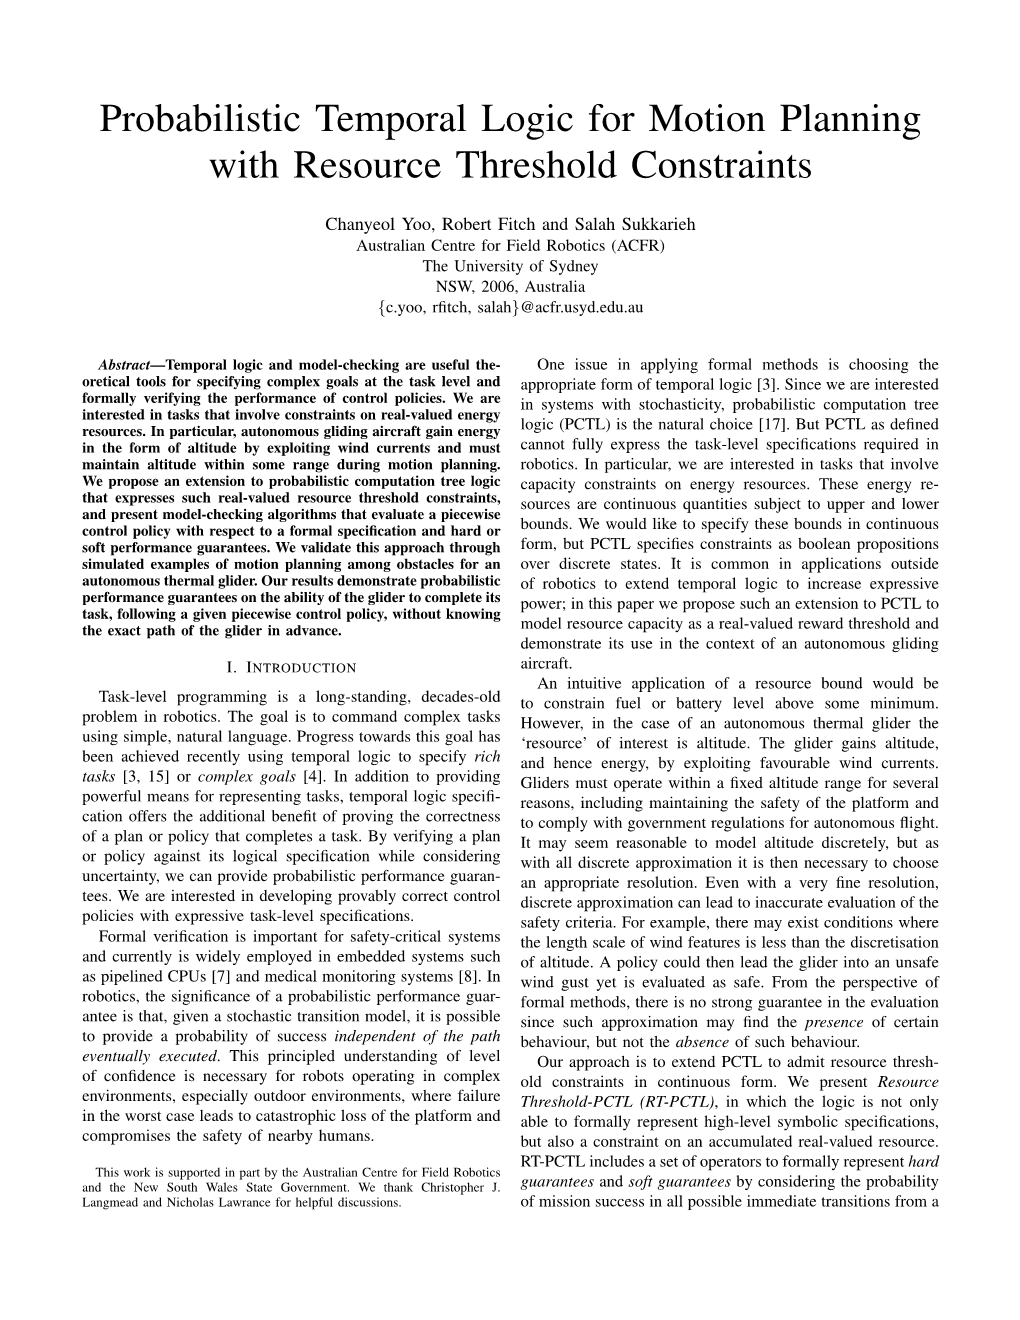 Probabilistic Temporal Logic for Motion Planning with Resource Threshold Constraints